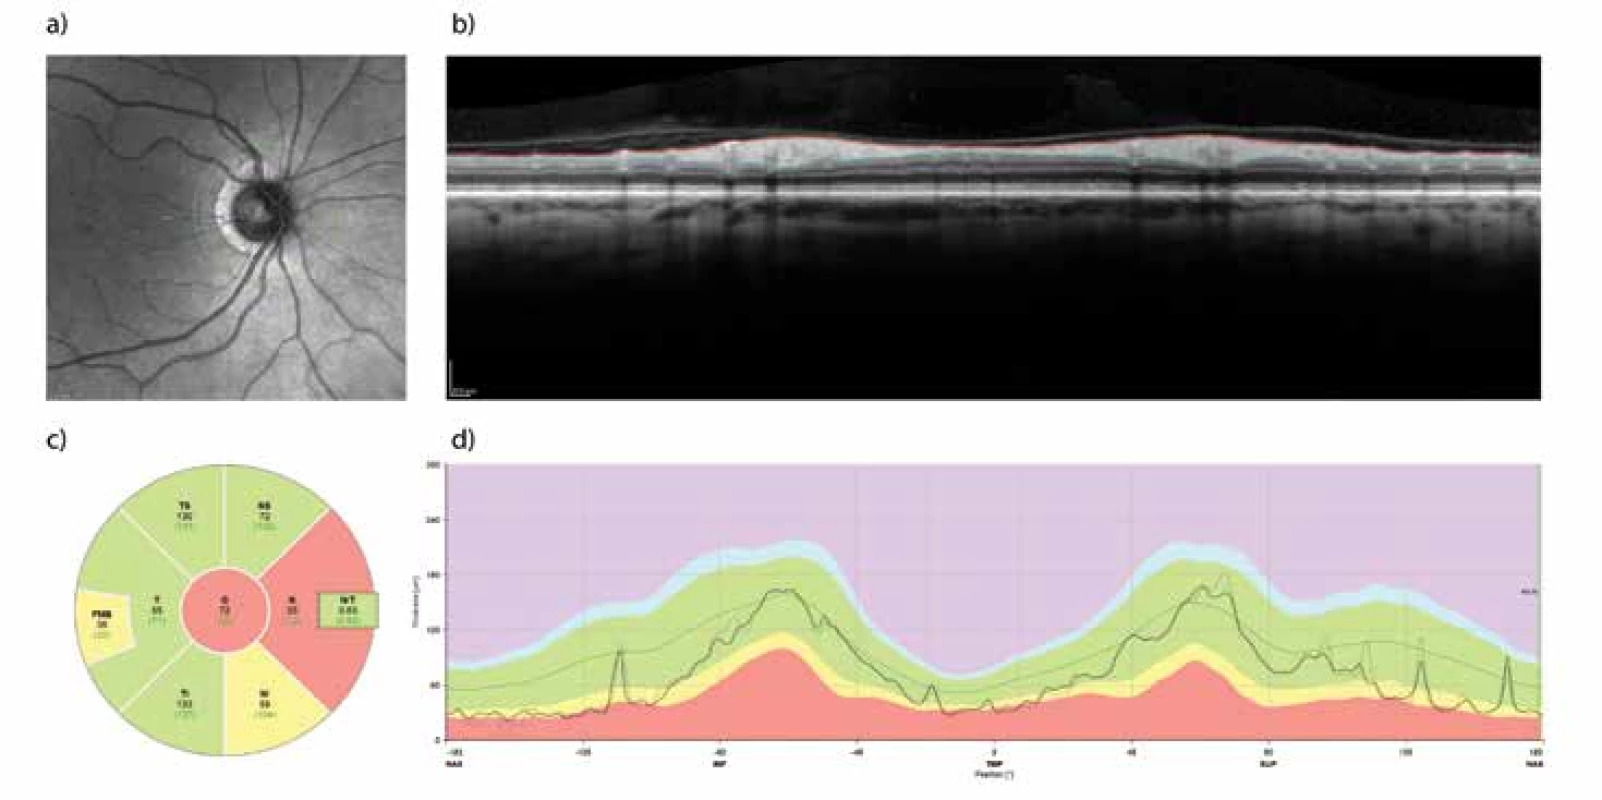 Retinal Nerve Fibre Layer (RNFL) measured with the aid of optical coherence tomography (OCT). Example of examination
of the retina of the right eye before surgical decompression of the chiasm in a 65-year-old woman. Measurement of the
“peripapillary RNFL” takes place along the green circle (a). The profile of the retinal layers in the indicated trajectory is on panel
(b), where the bordering of the internal limiting membrane and the interface between the axonal fibres and the bodies of the
retinal ganglion cells are also indicated. The difference between both profiles forms the thickness of the peripapillary RNFL,
and is illustrated on panel (d) as the thicker line running through the green band indicating the normal values for the given age
group. The average and normative values of RNFL thickness in the nasal and temporal quadrant and their superior and inferior
parts together with the global value are shown in panel (c). The nasal quadrant shows a reduced thickness of the RNFL as a
consequence of compression of the crossed fibres of the optic nerve